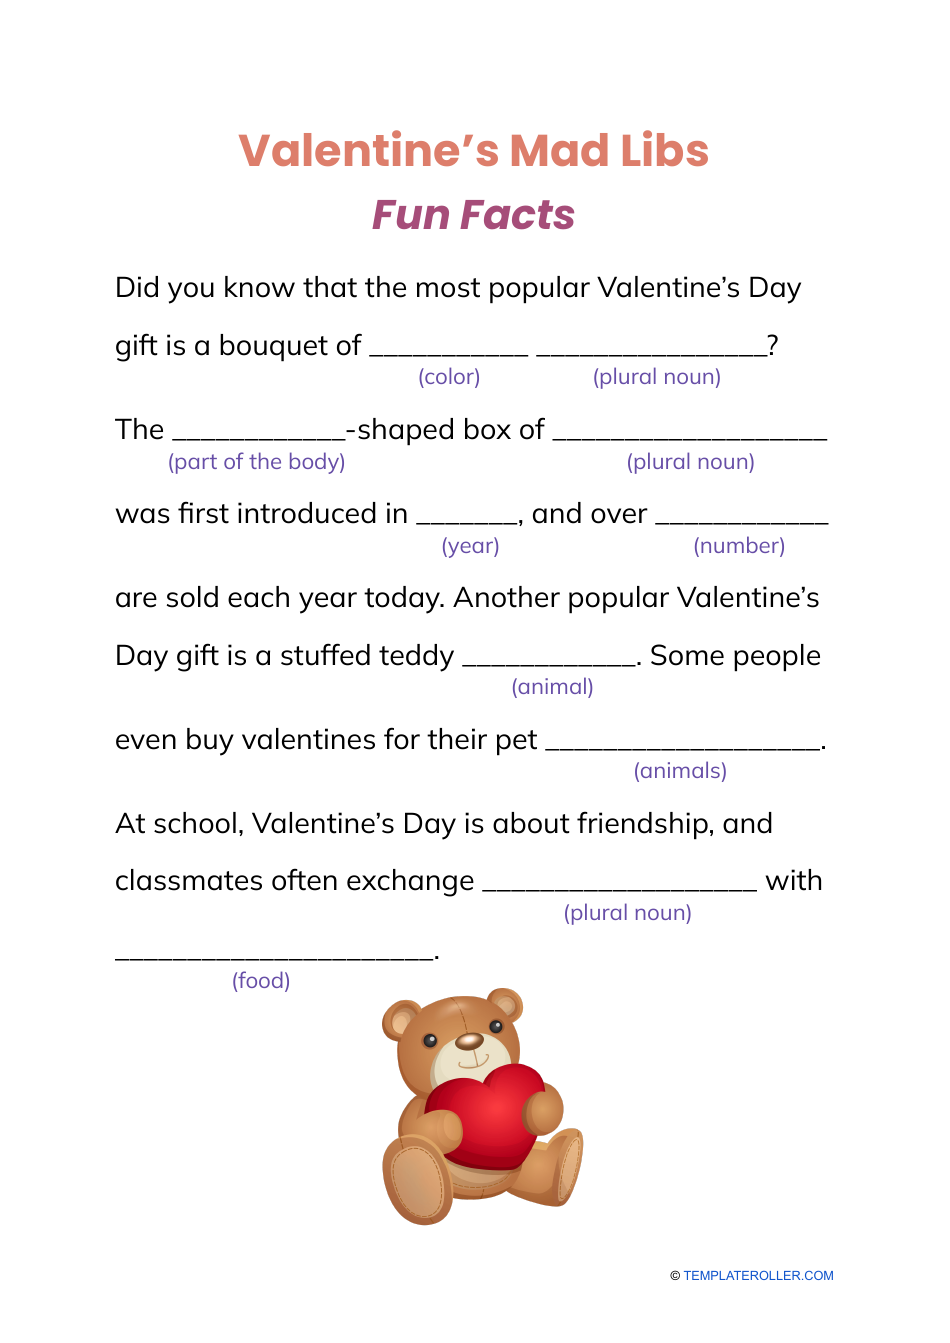 Valentine's Day Mad Libs - Fun Facts in Use - Image Preview